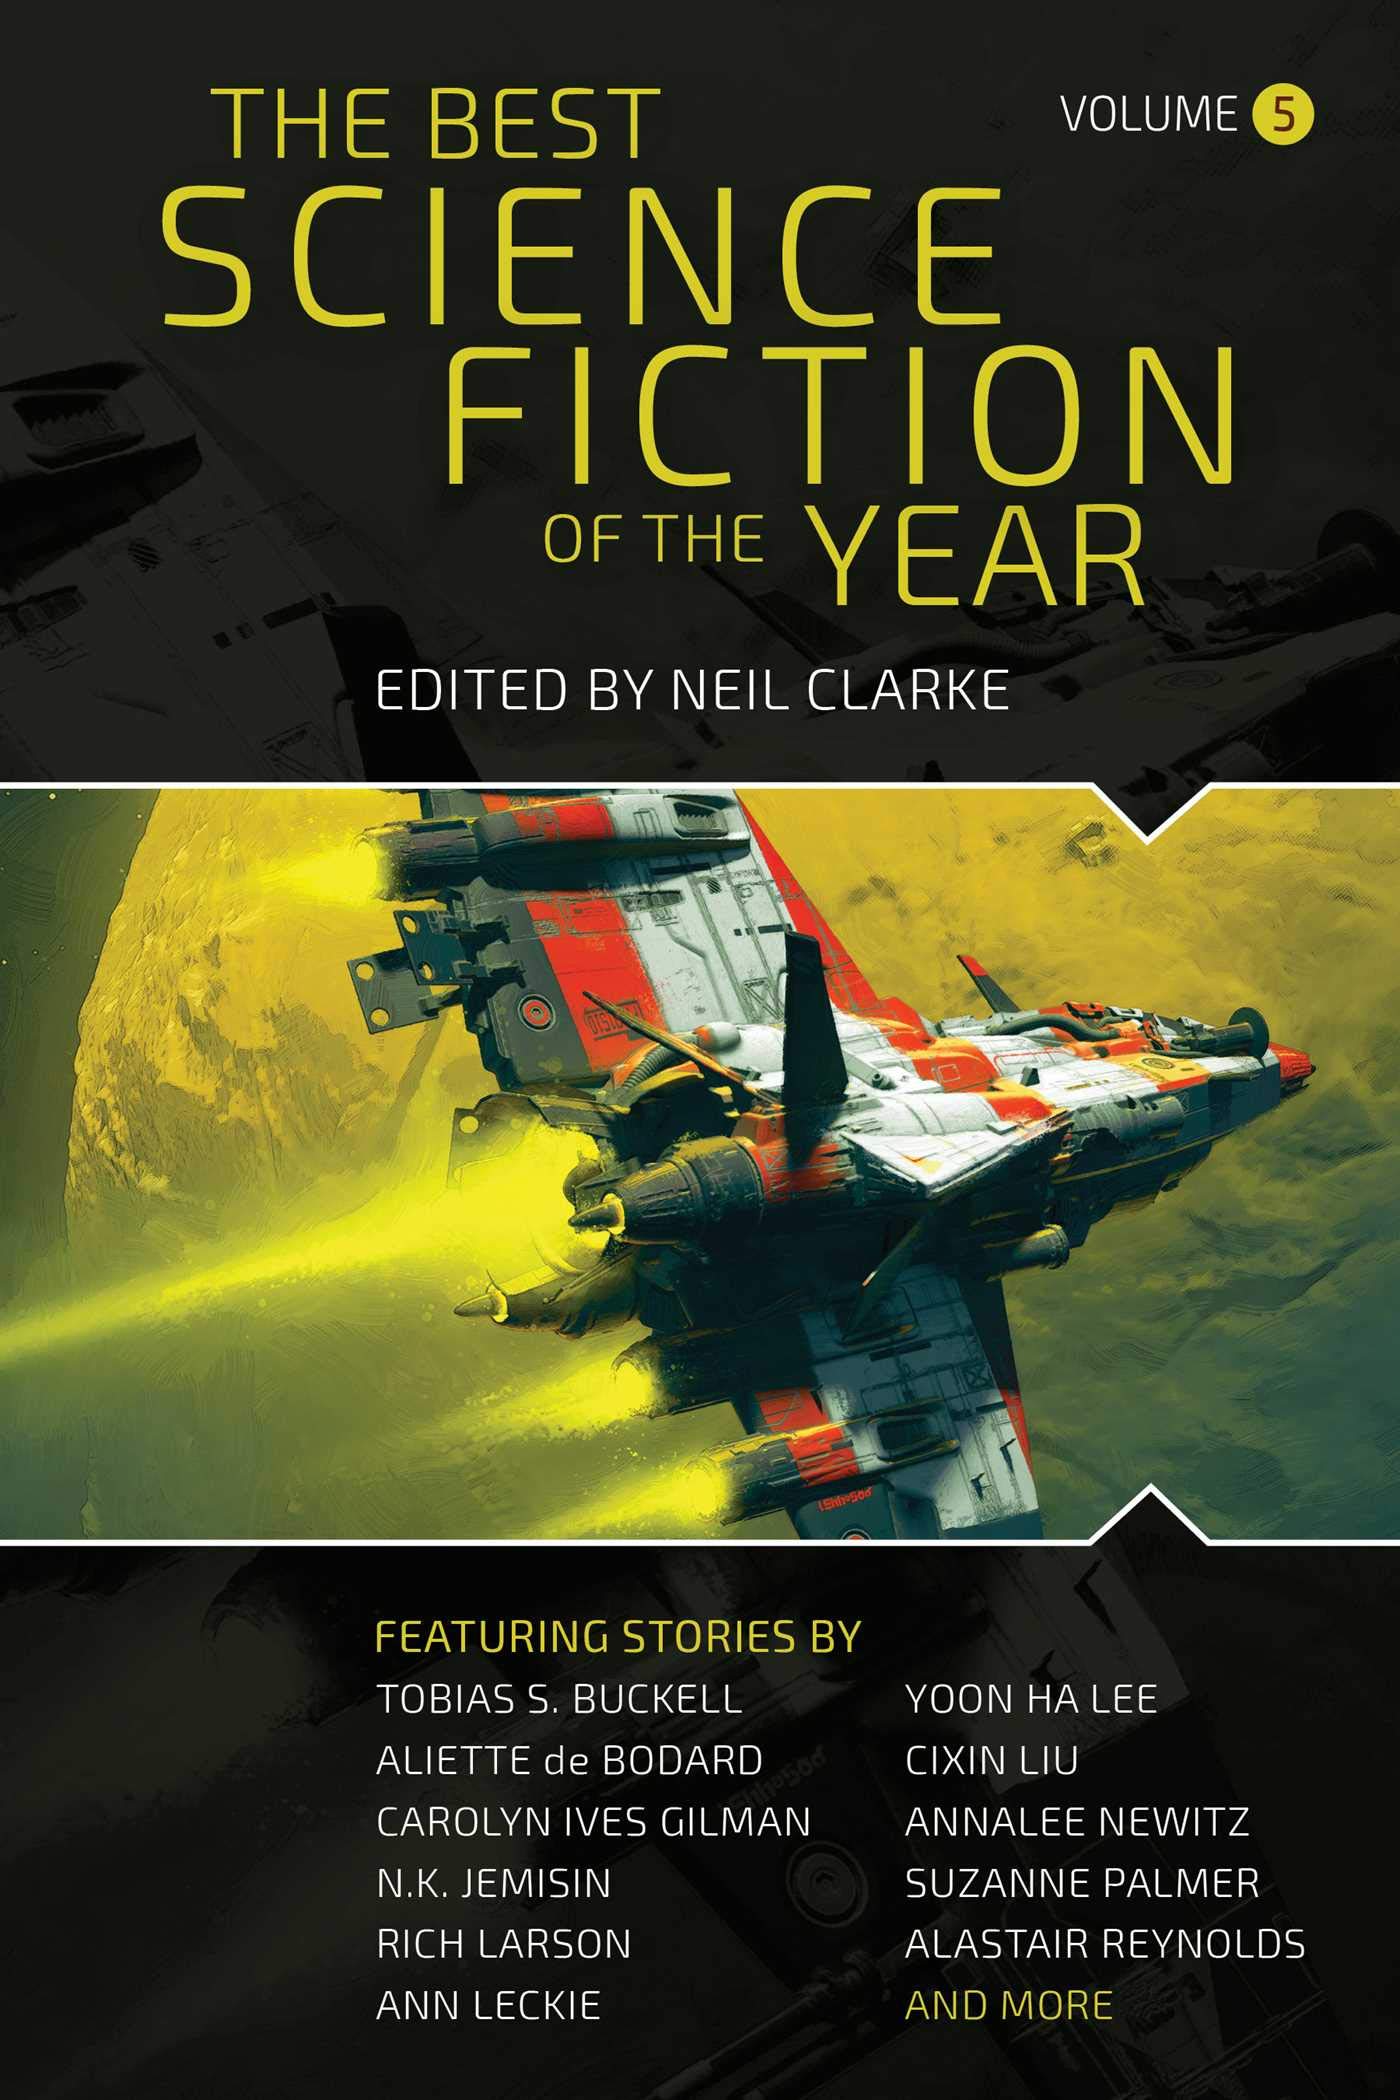 science fiction book review